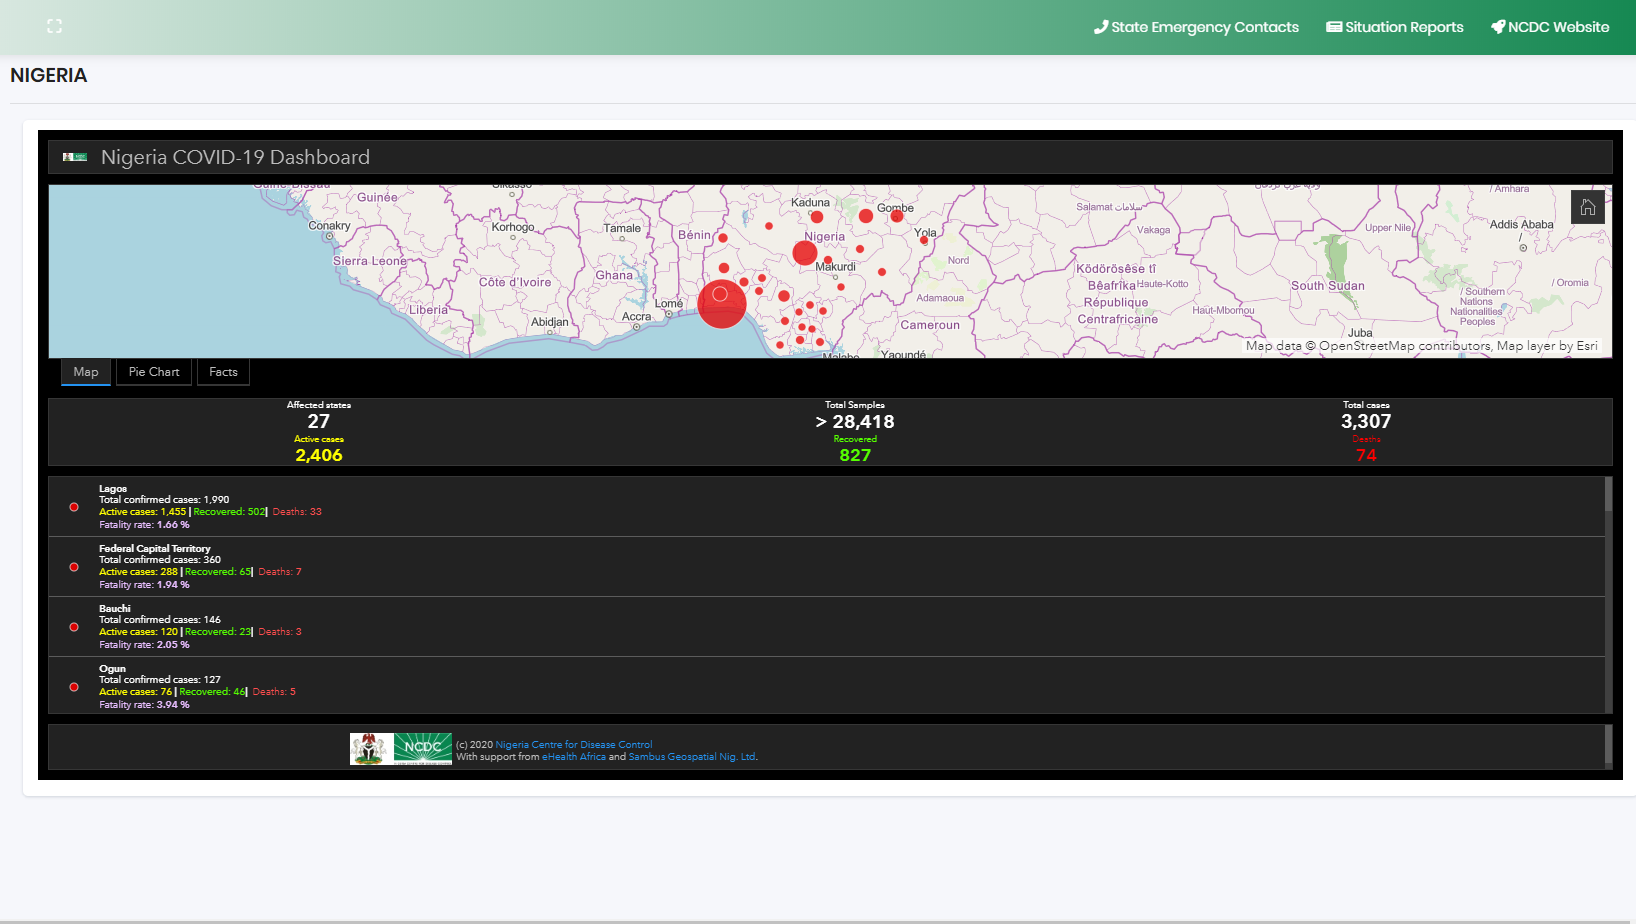 Screenshot of the NCDC microsite displays real-time COVID-19 outbreak data